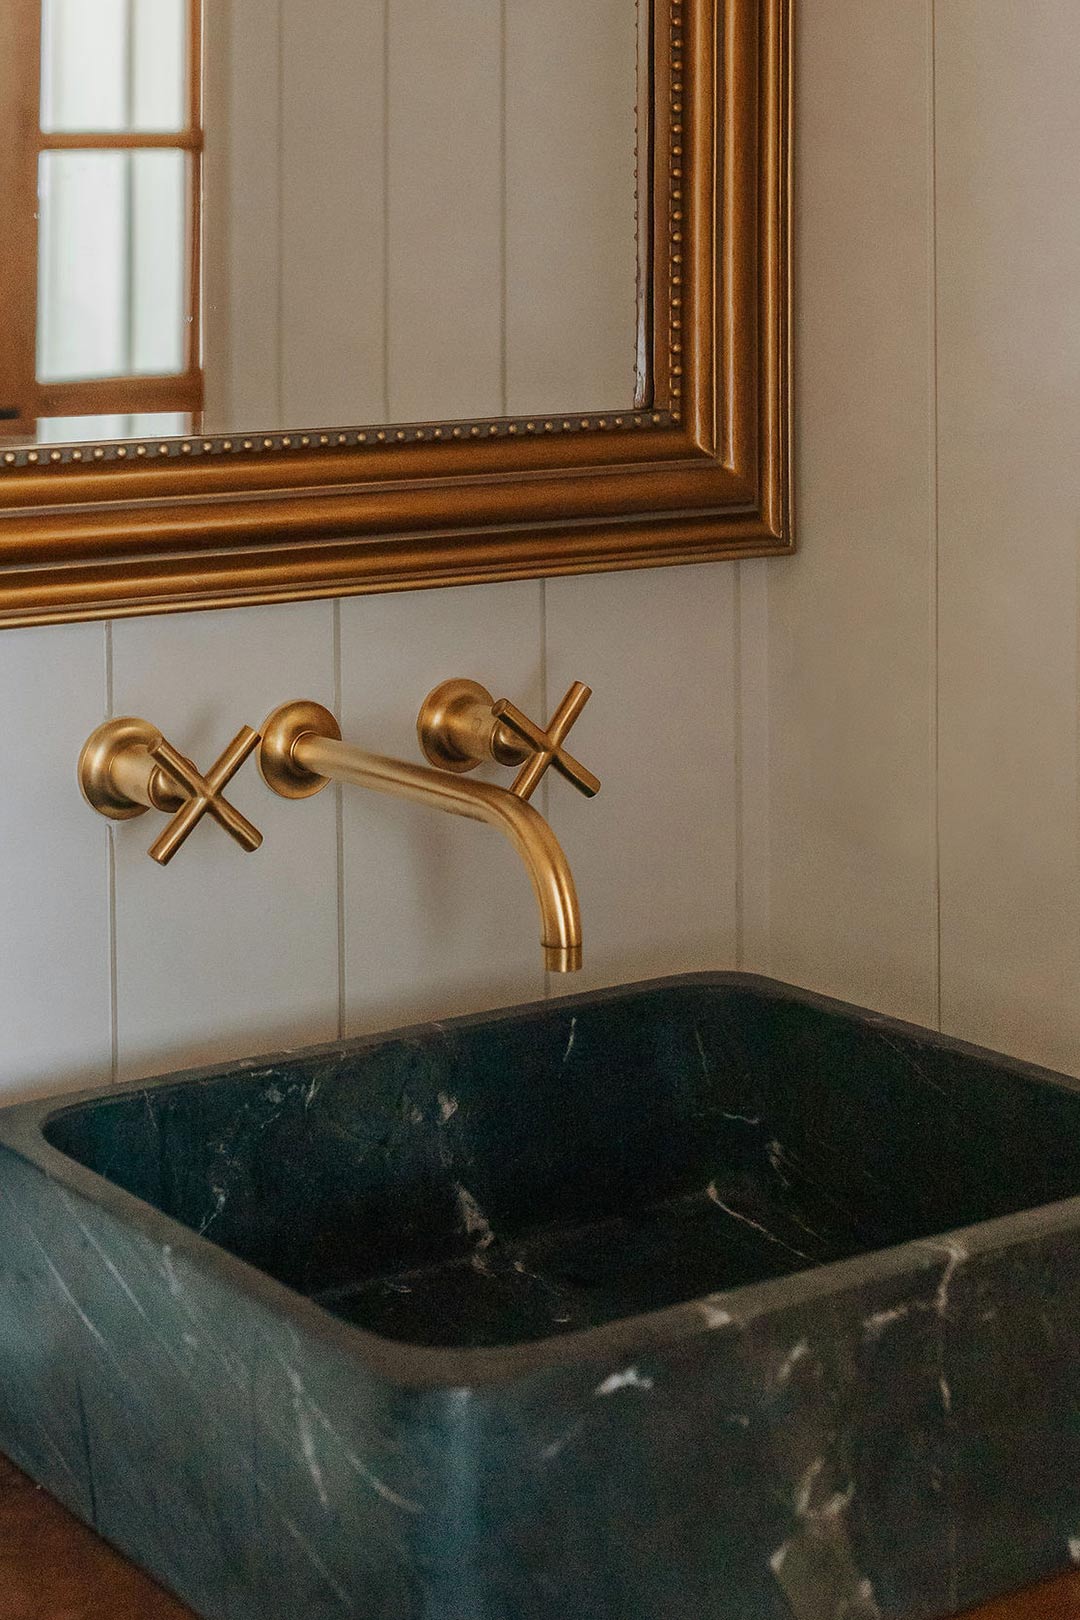 Kohler Purist Brass cross handle wall mount faucet paired with vintage inspired brass mirro and vertical shiplap wall paneling in a Modern farmhouse half bath